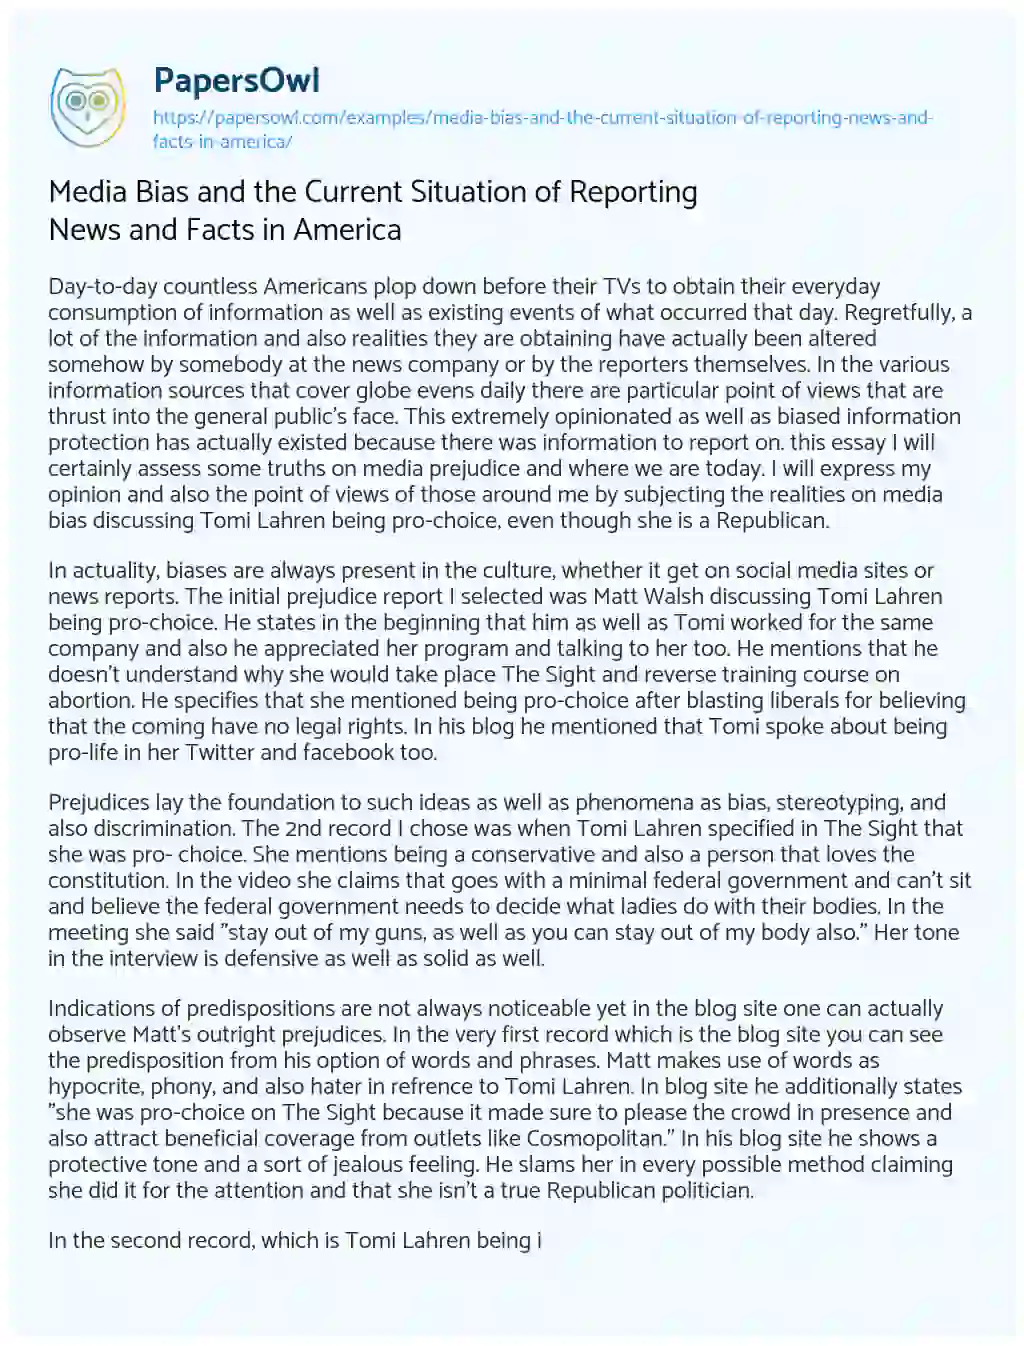 Essay on Media Bias and the Current Situation of Reporting News and Facts in America